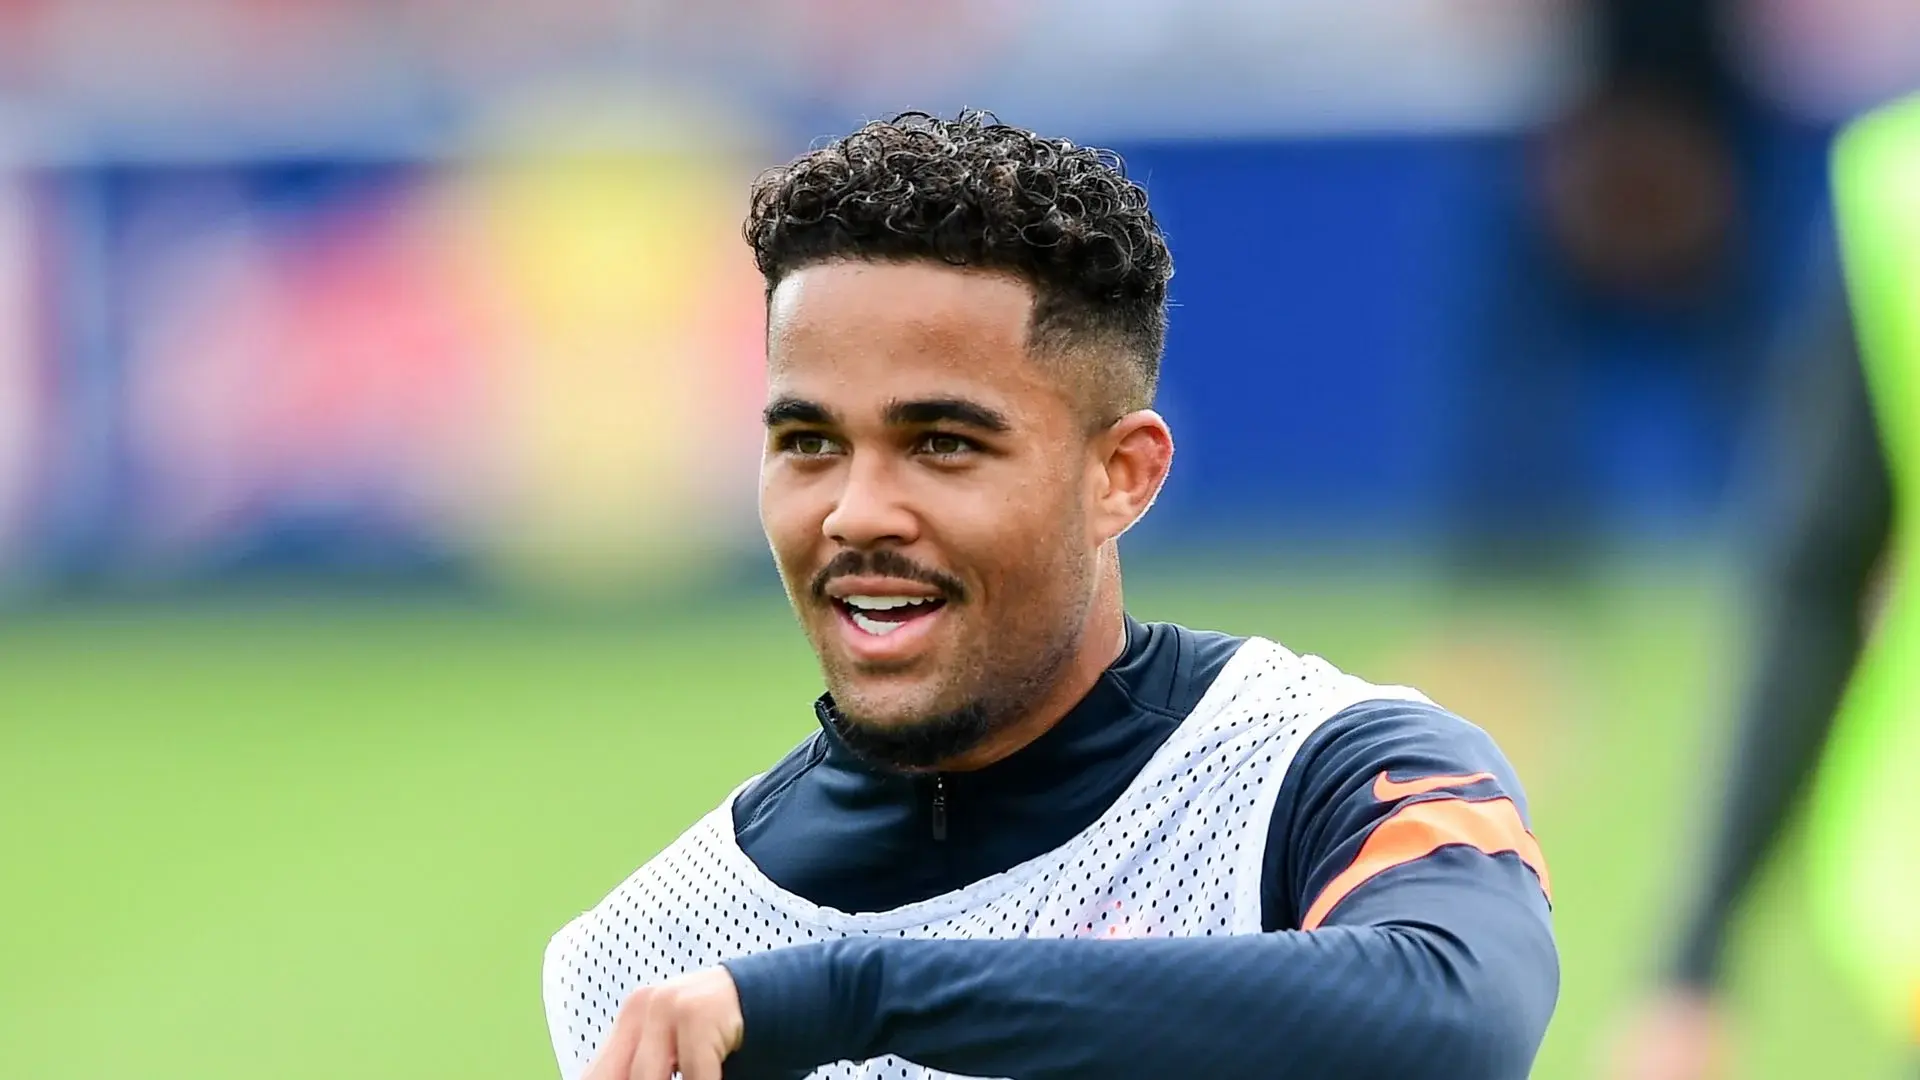 This is the definitive transfer of Kluivert to Valencia CF
